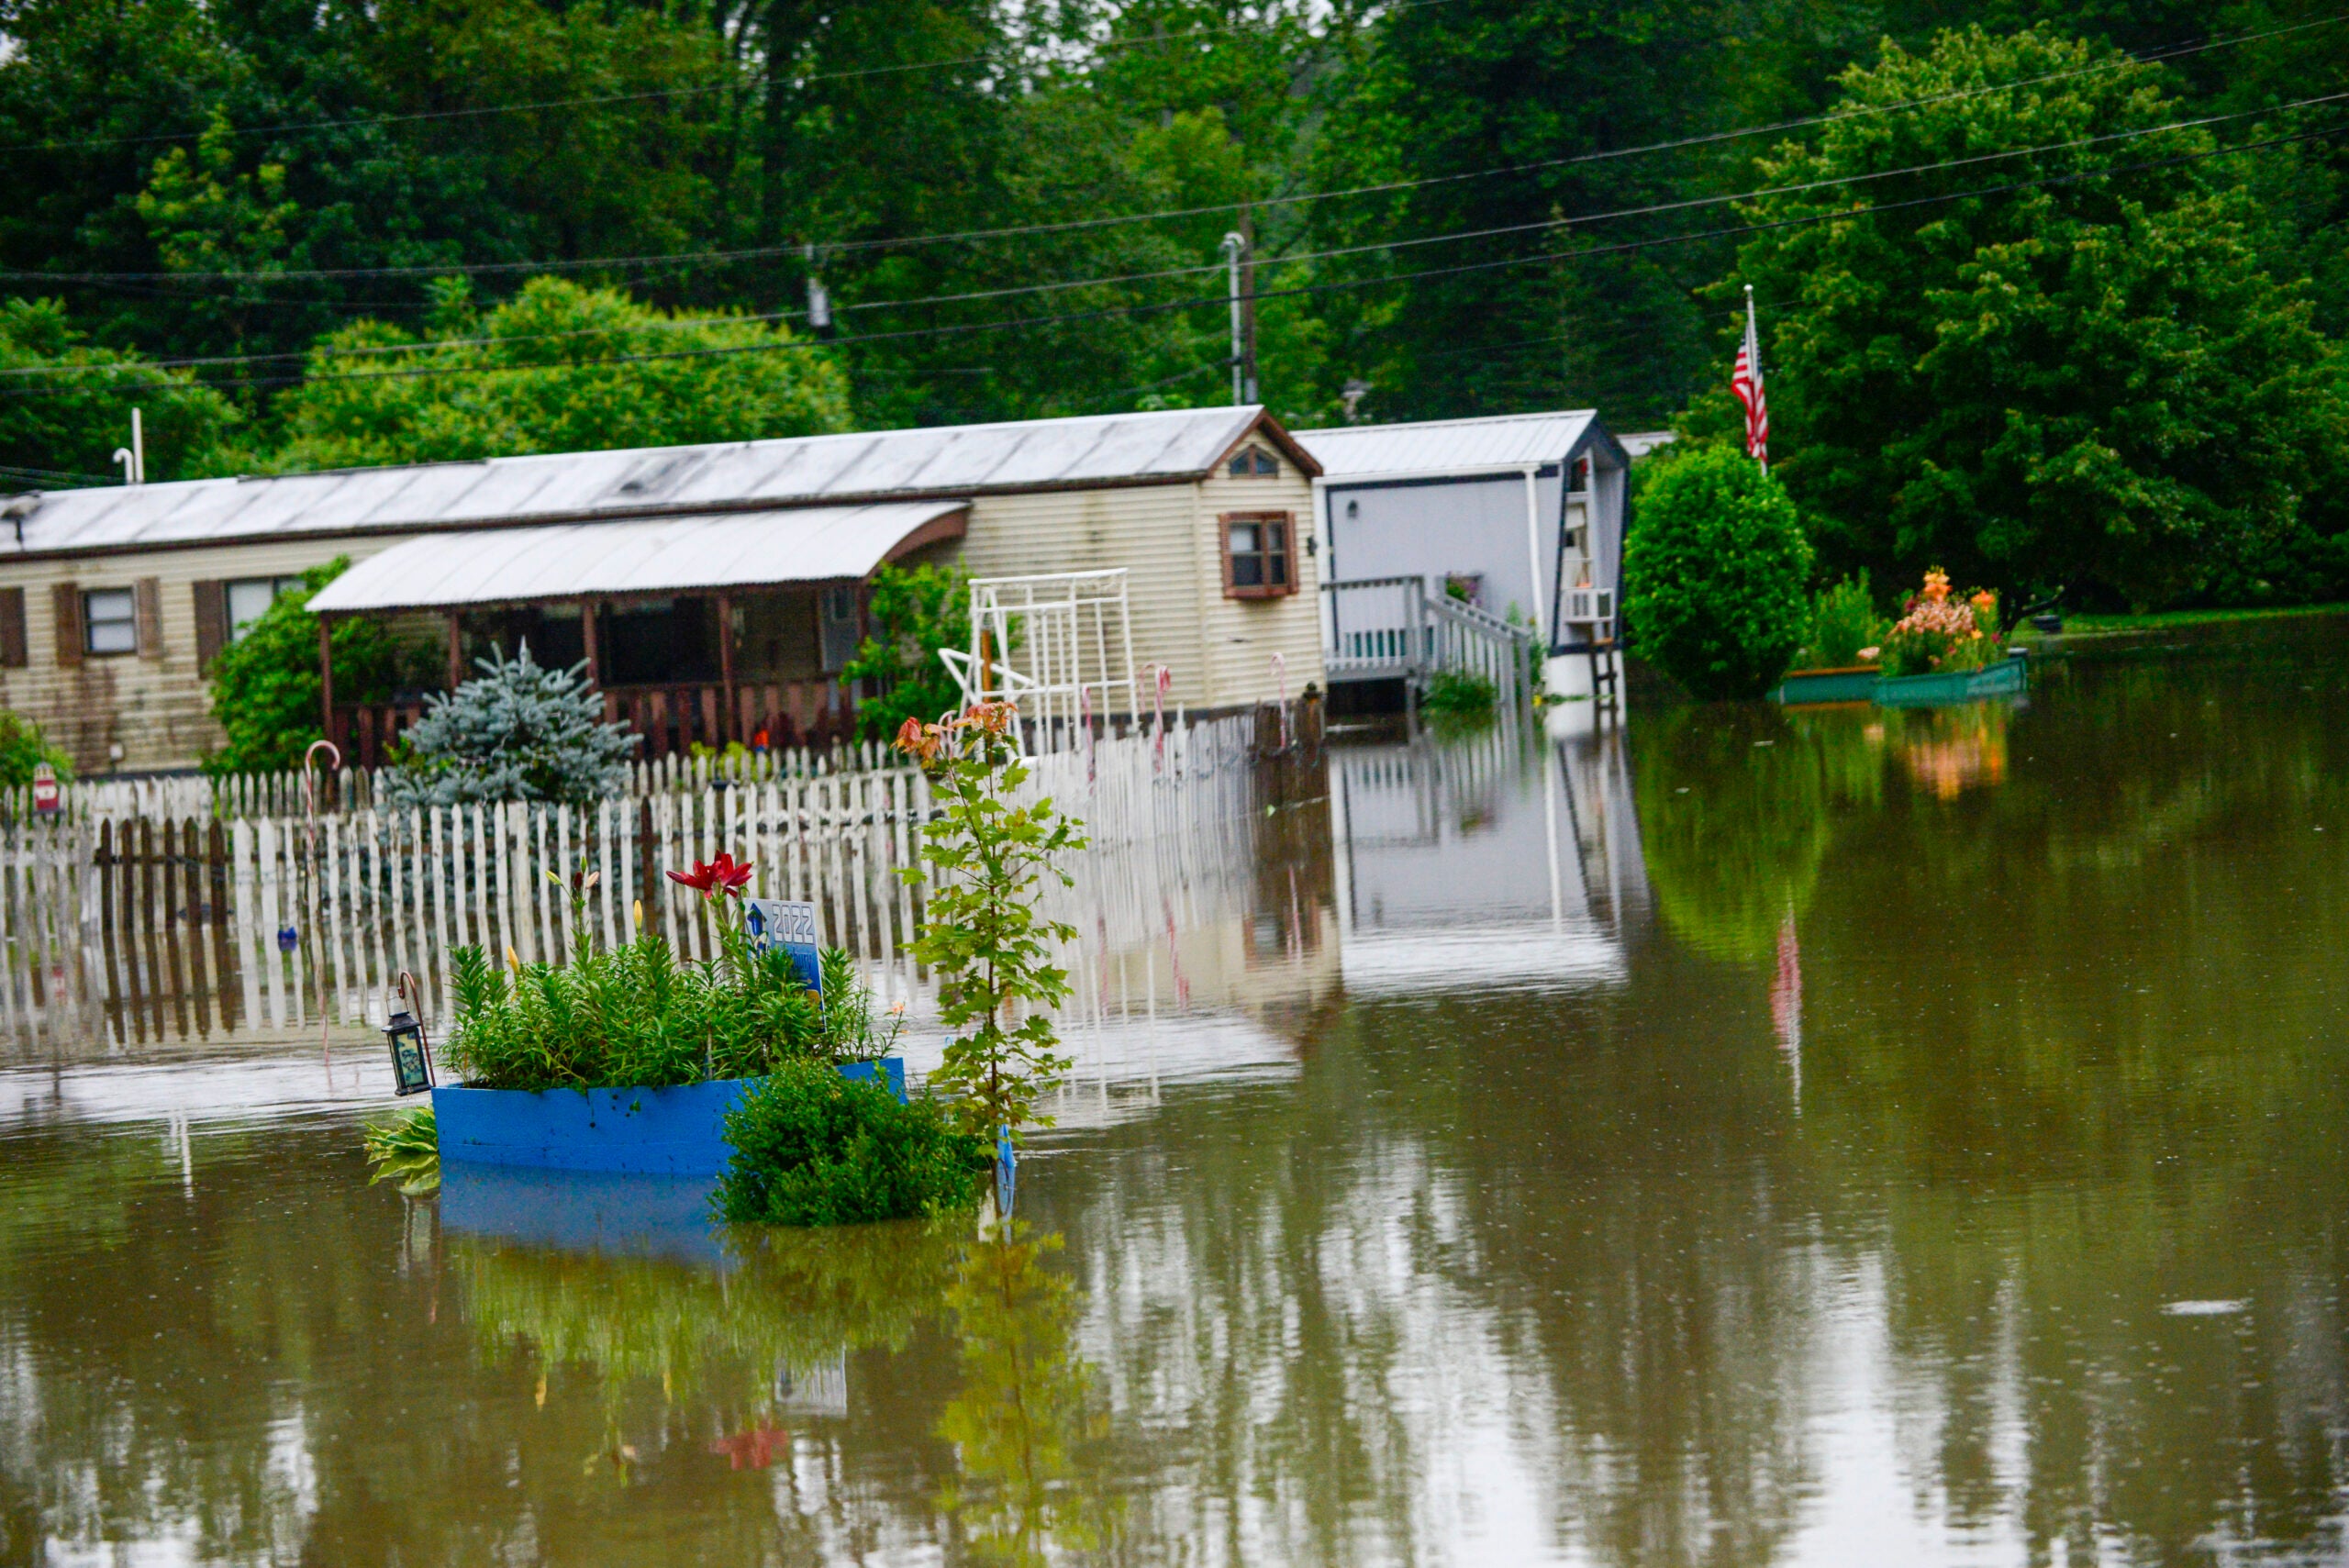 Video and photos what the flooding looks like across New England